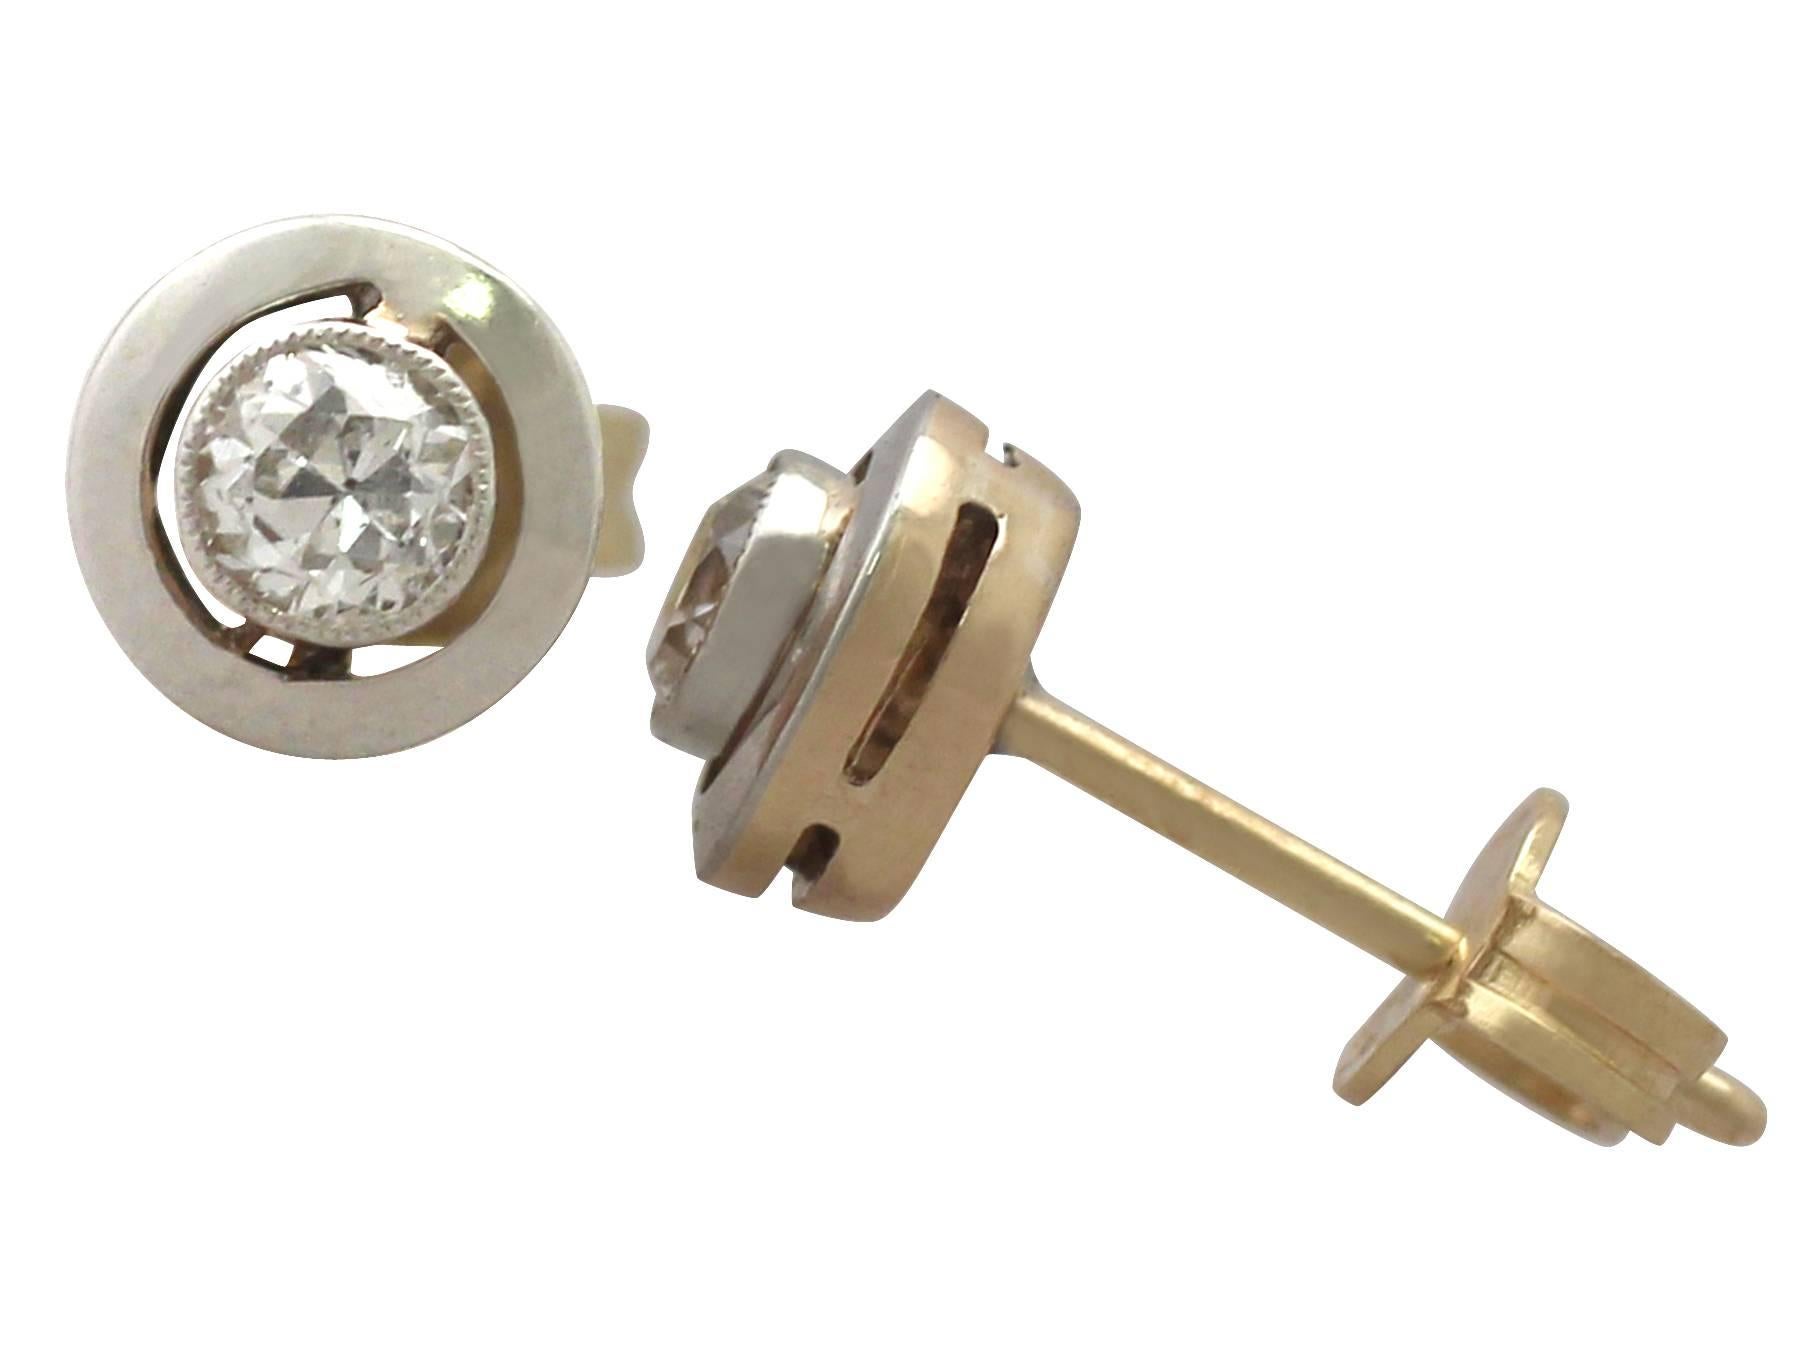 A fine and impressive pair of antique 0.36 carat diamond and 9 karat yellow gold, platinum set stud style earrings; part of our diamond jewelry and estate jewelry collections

These impressive antique 1920's stud earrings have been crafted in 9k